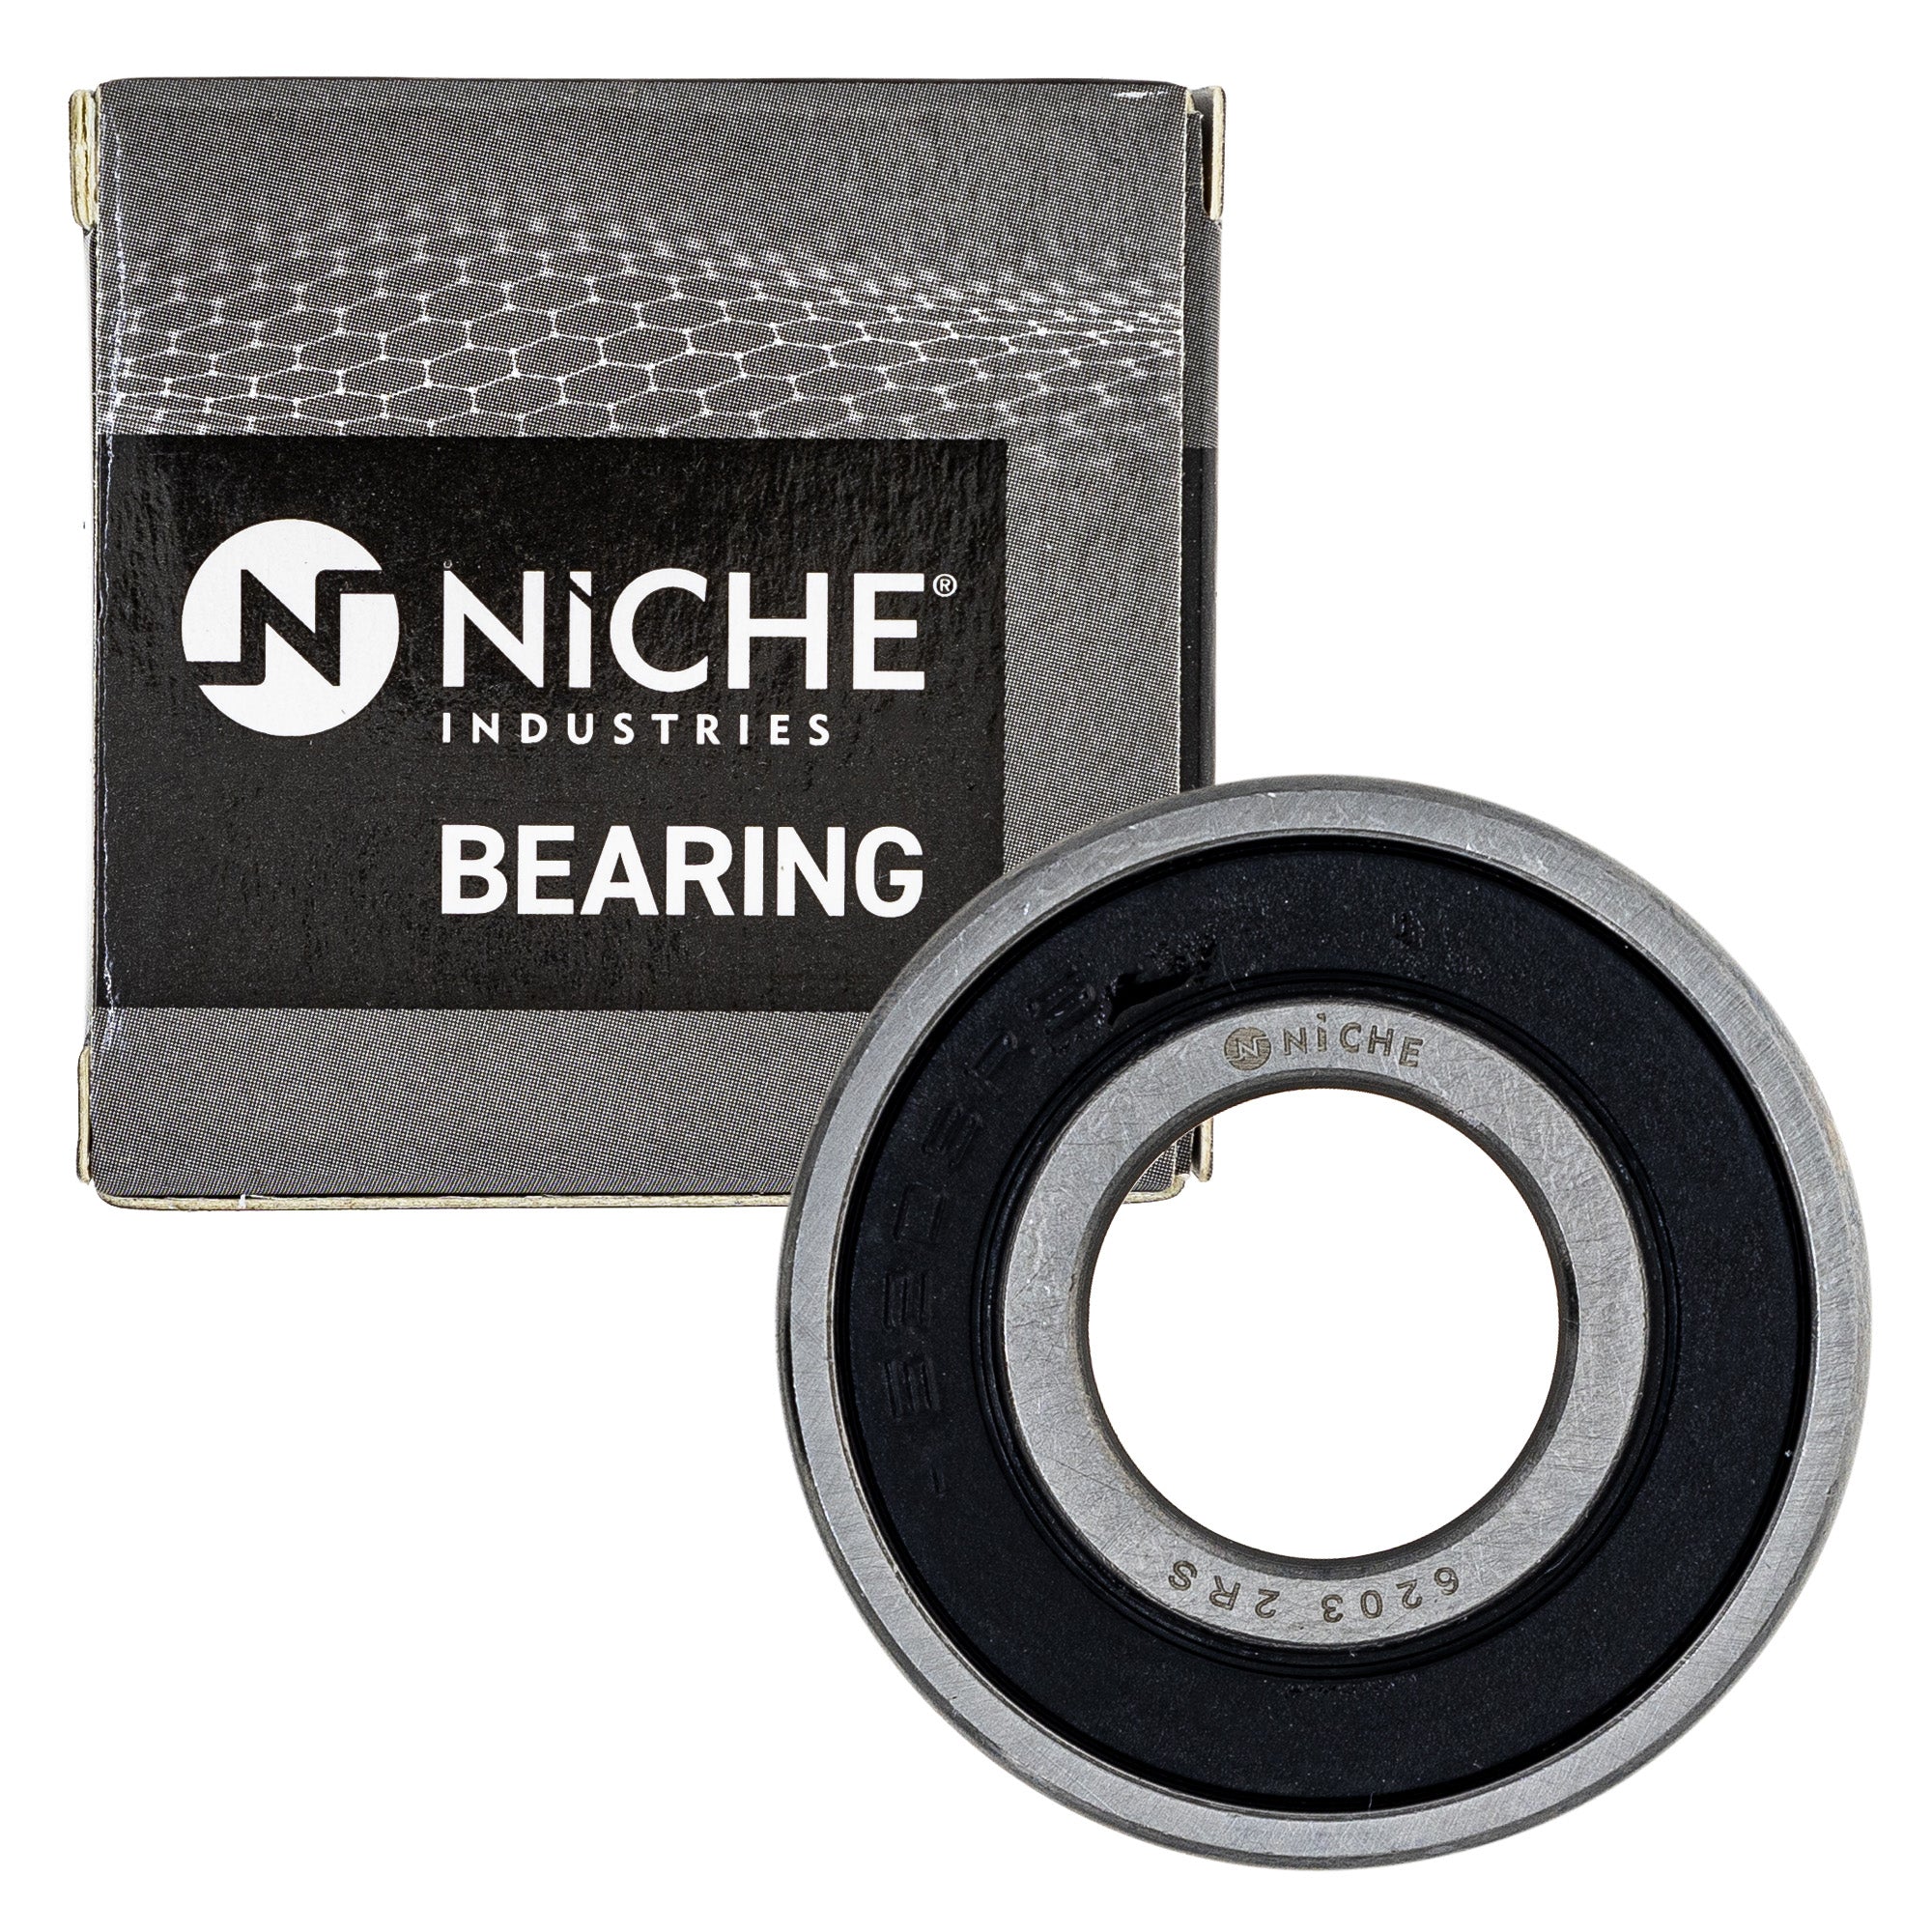 NICHE MK1009124 Wheel Bearing Seal Kit for zOTHER Ref No W650